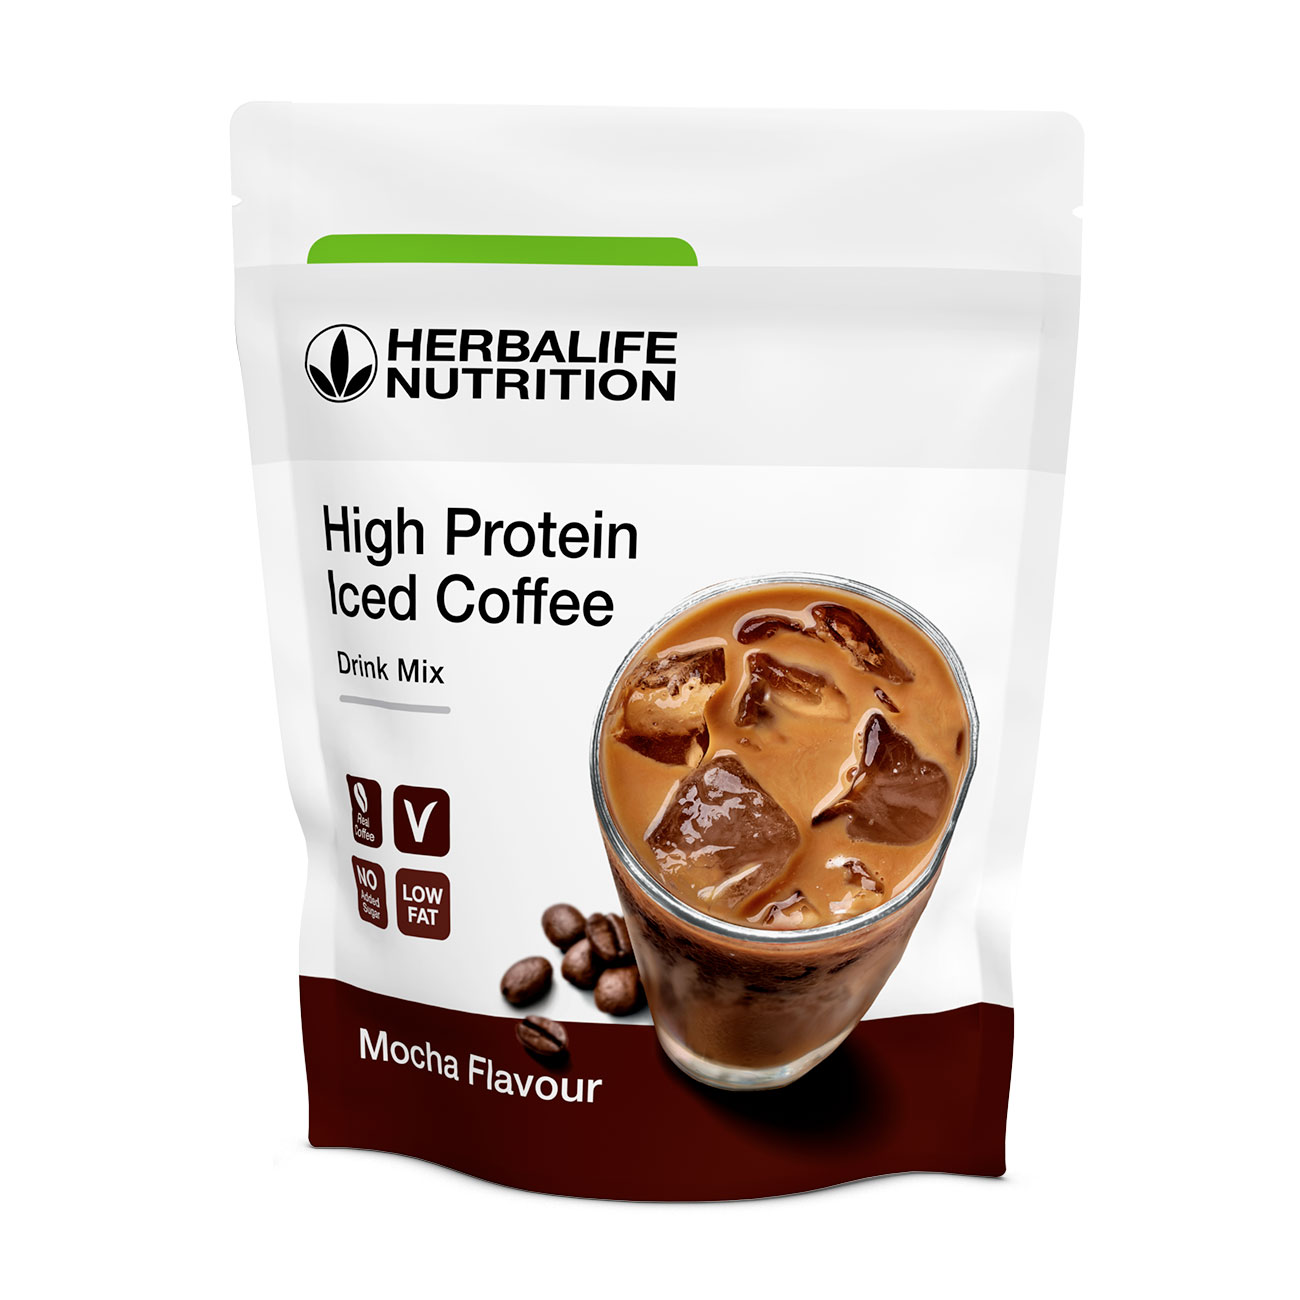 High Protein Iced Coffee  Mocha product shot.